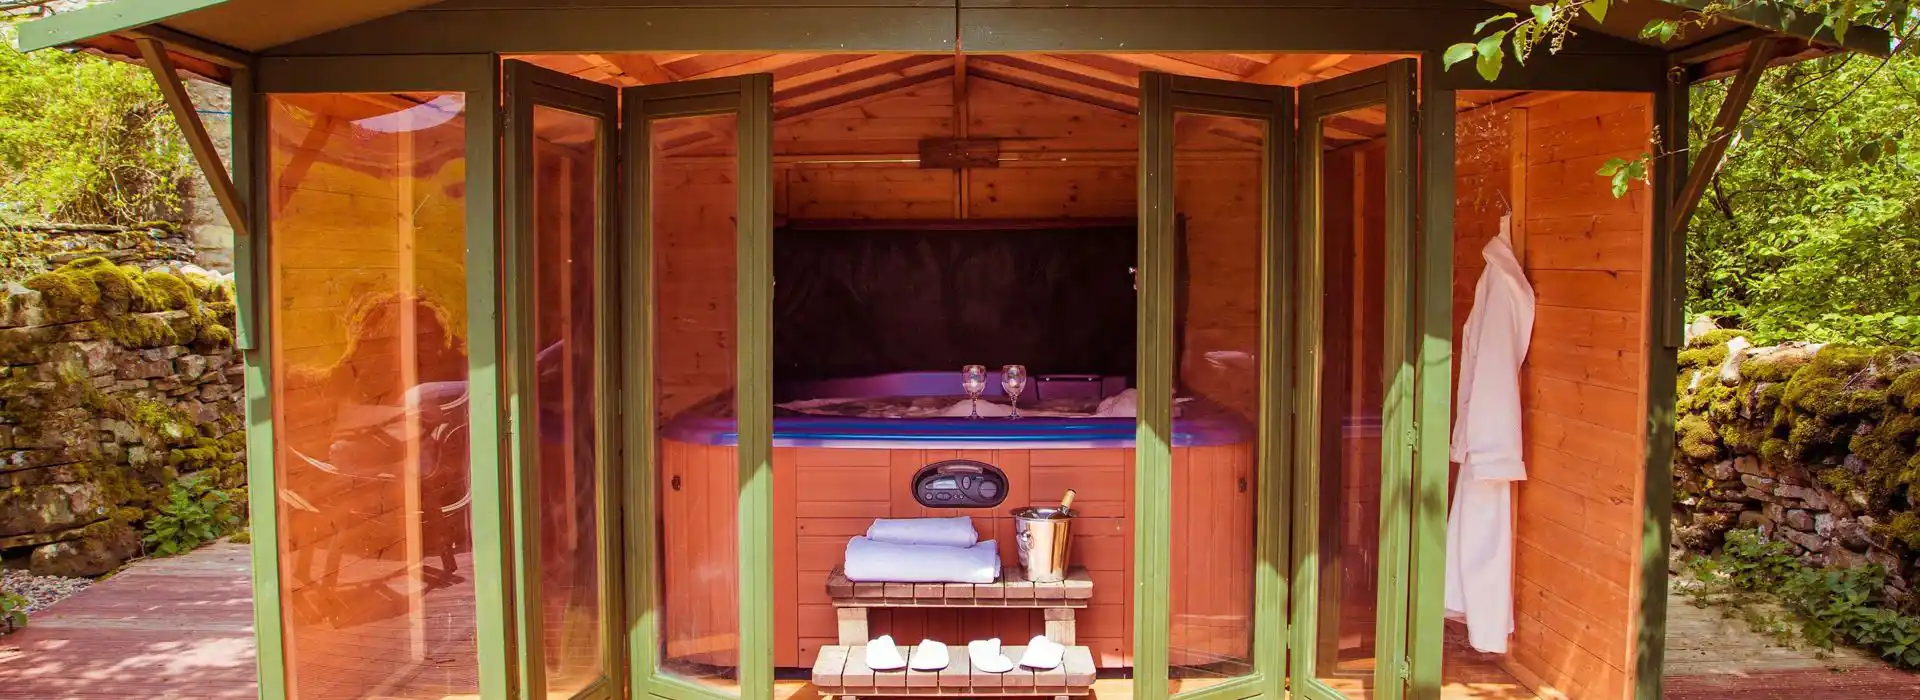 Glamping with hot tubs in North East England